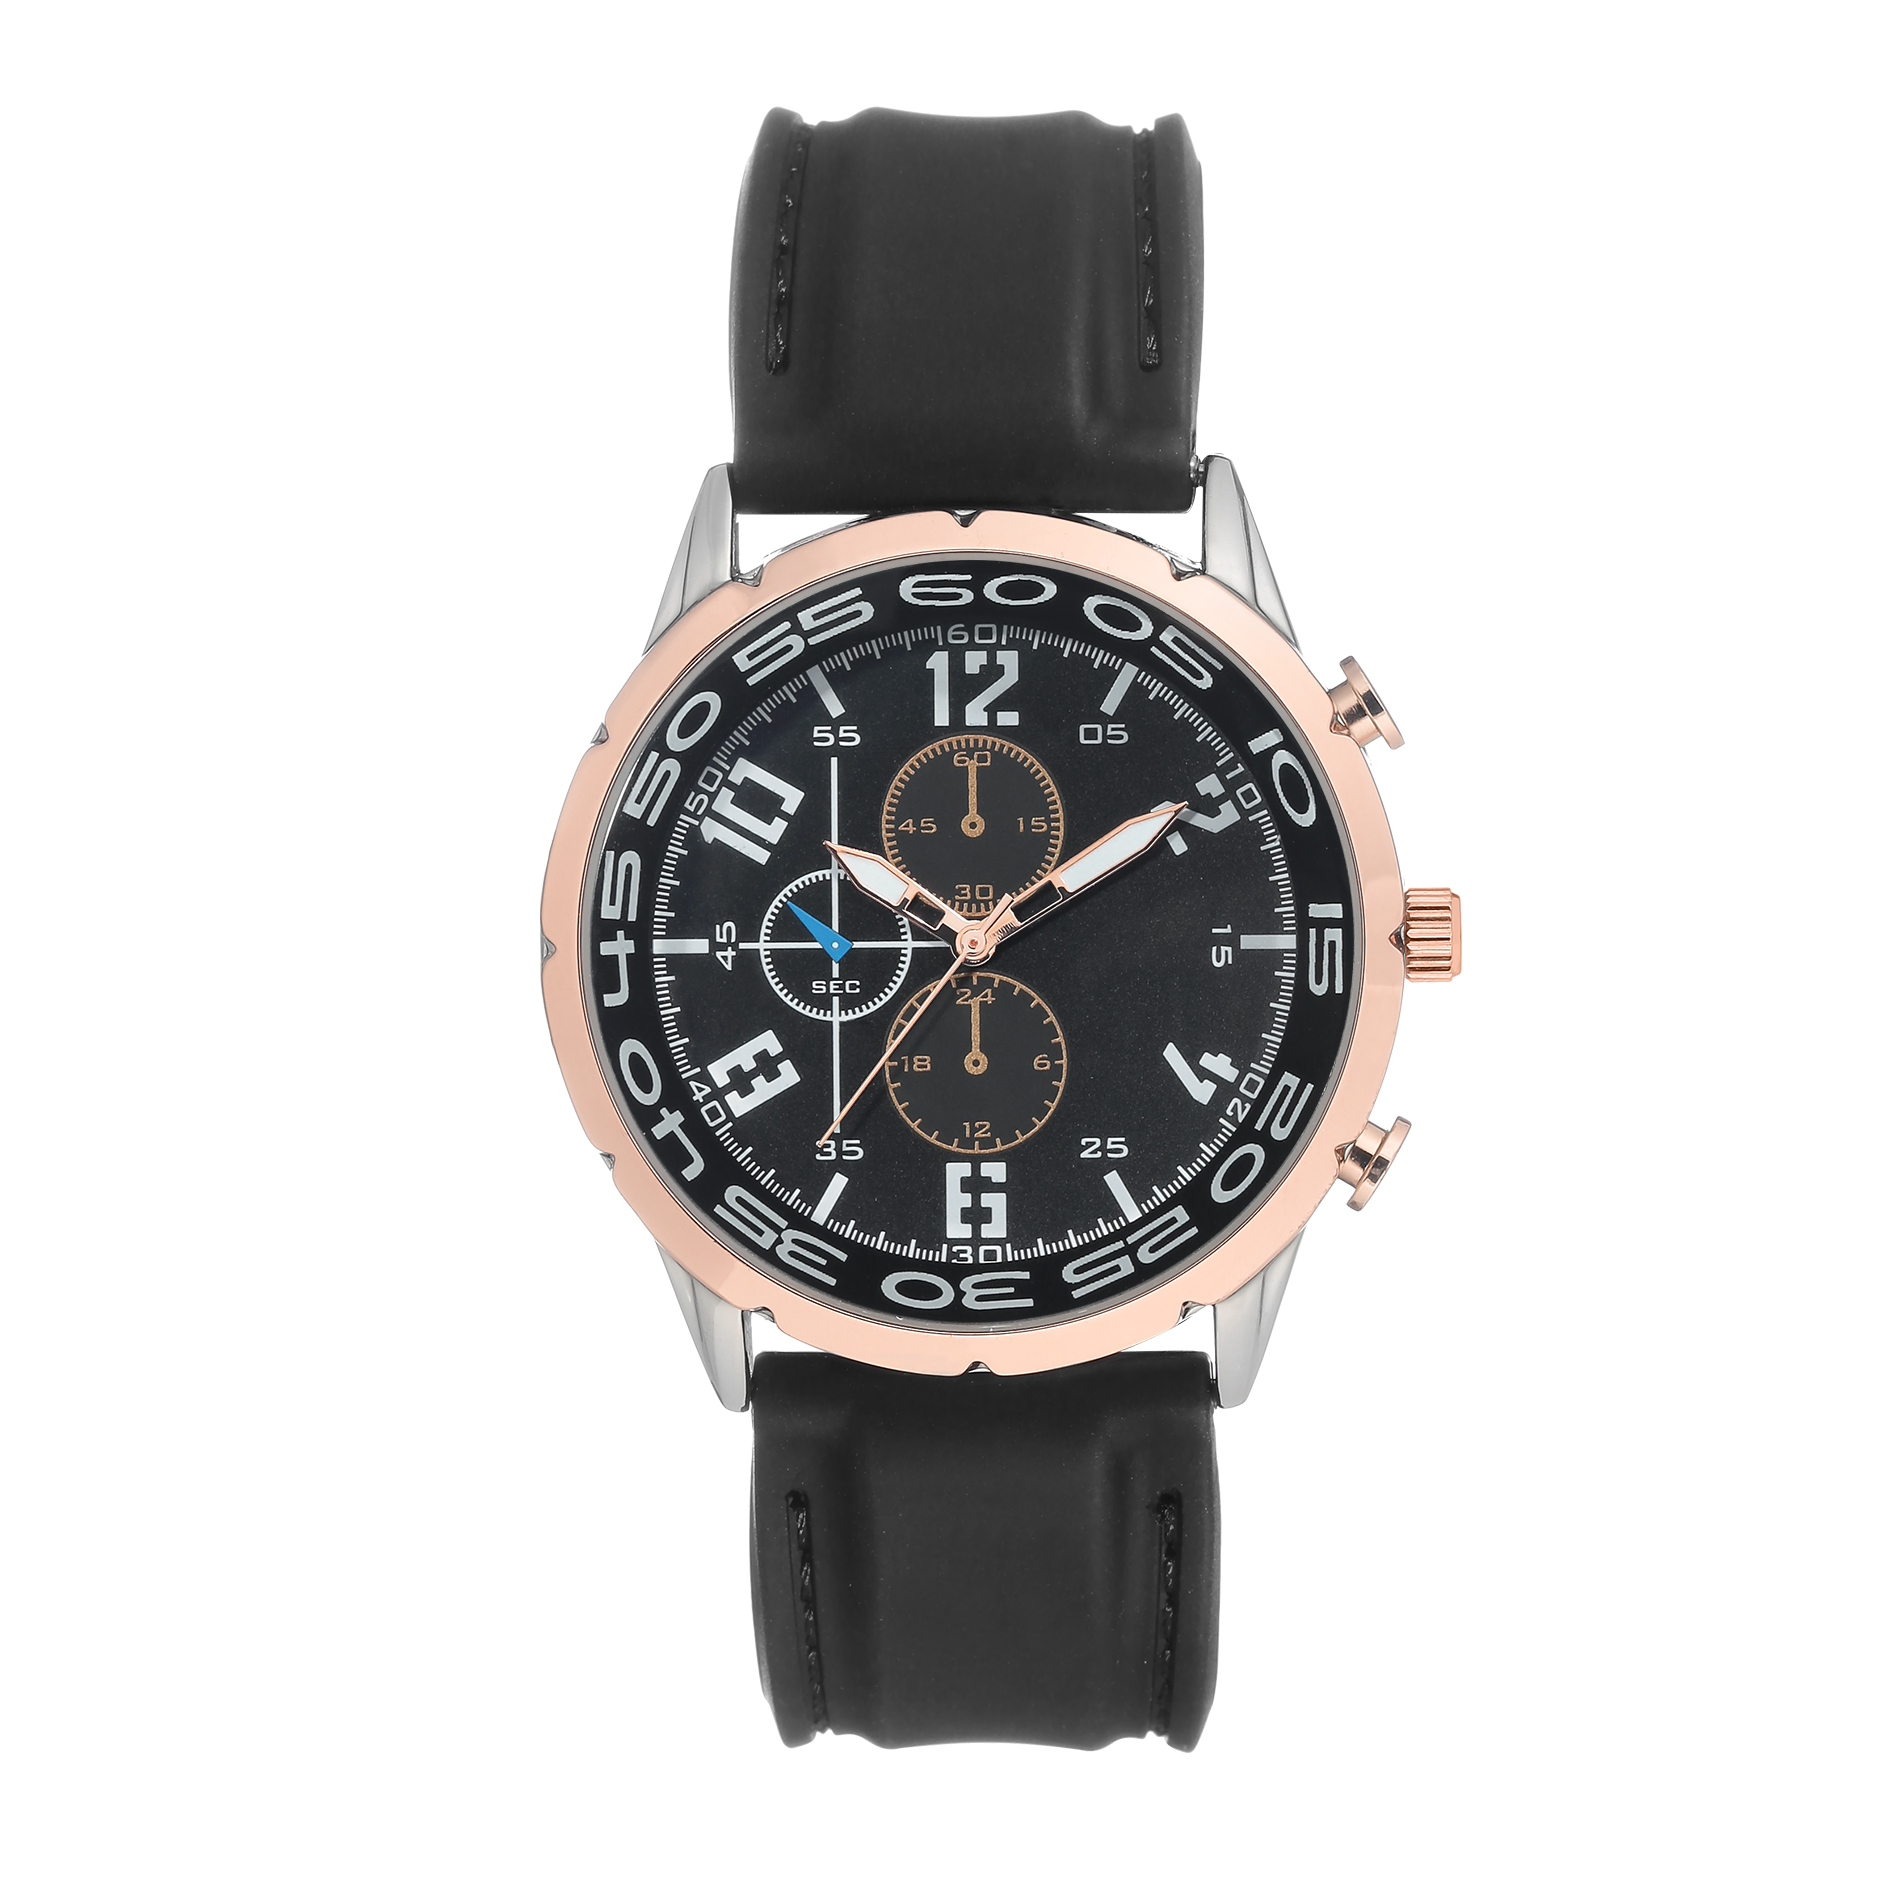 Men's Black Faux Leather Strap Watch with Rose Gold Bezel